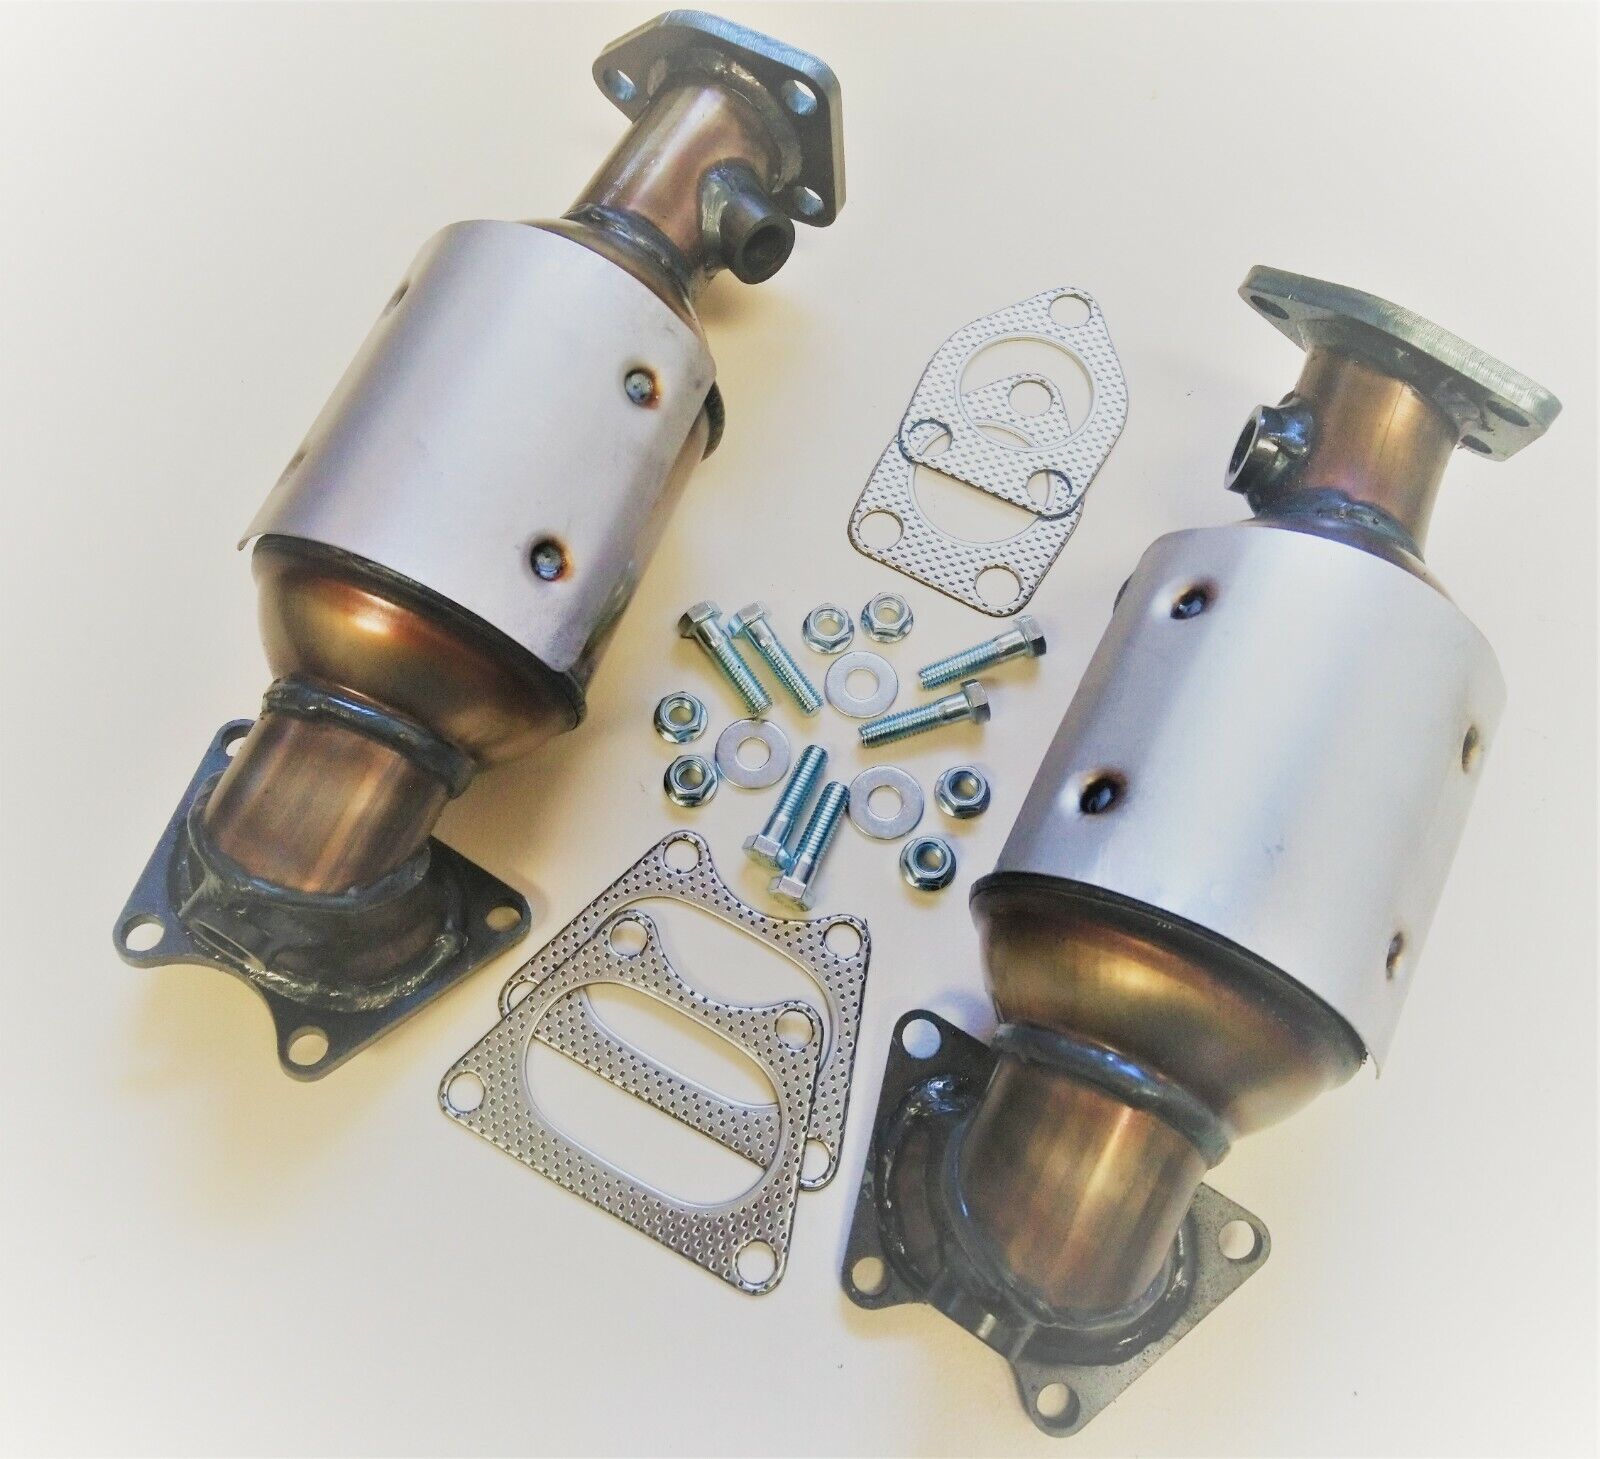  2003 - 2009 Acura MDX 3.5L And 3.7L Catalytic Converters Bank 1 And Bank 2